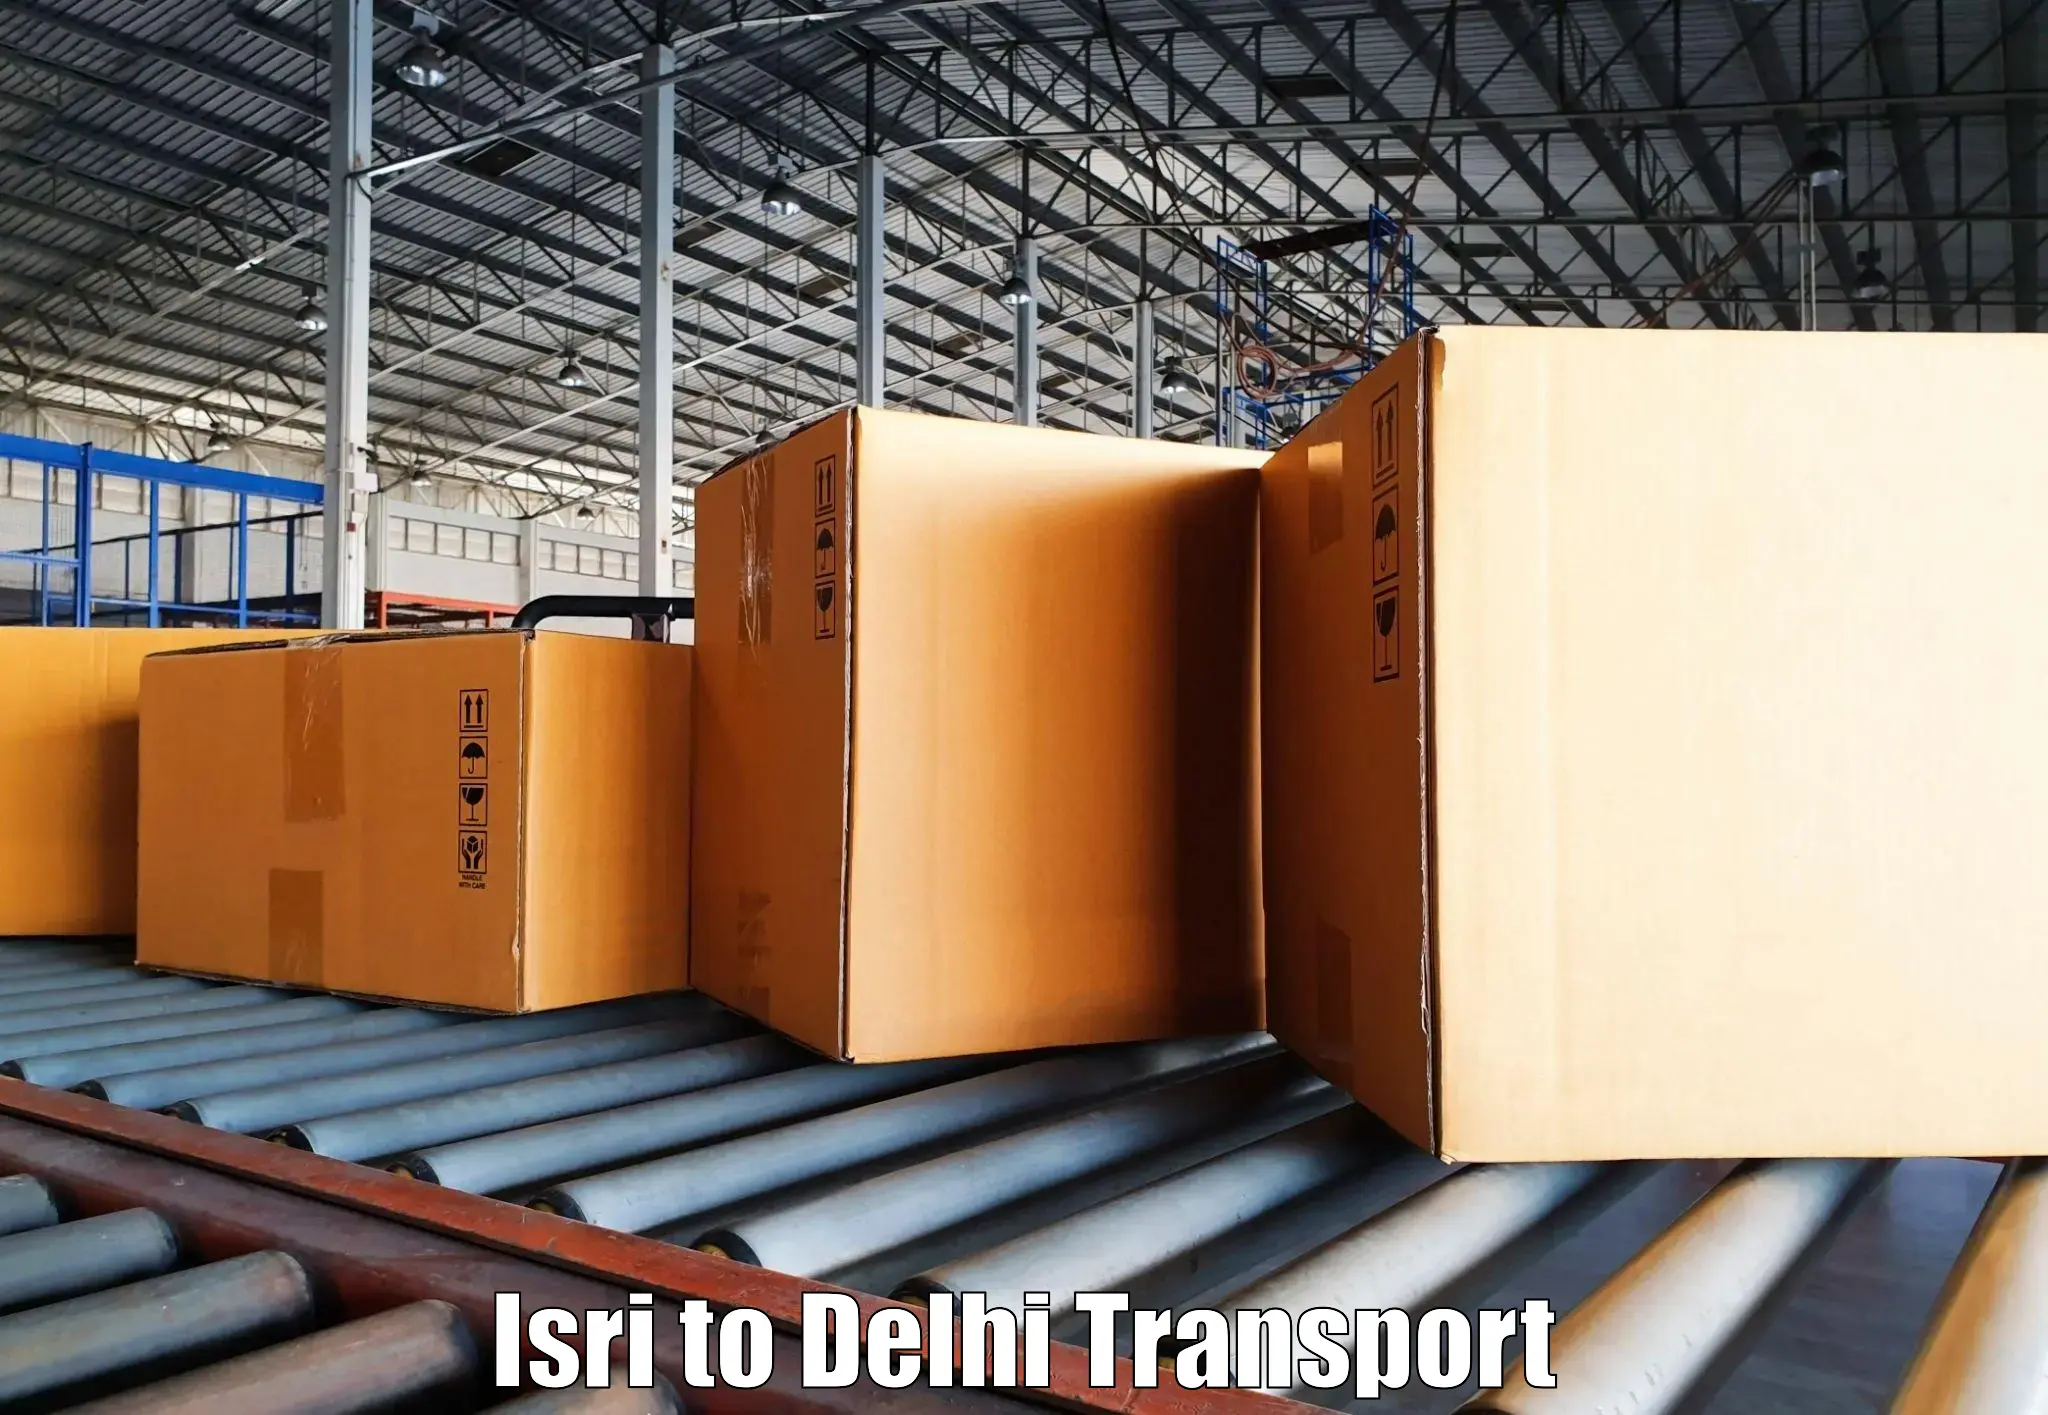 Air freight transport services Isri to Delhi